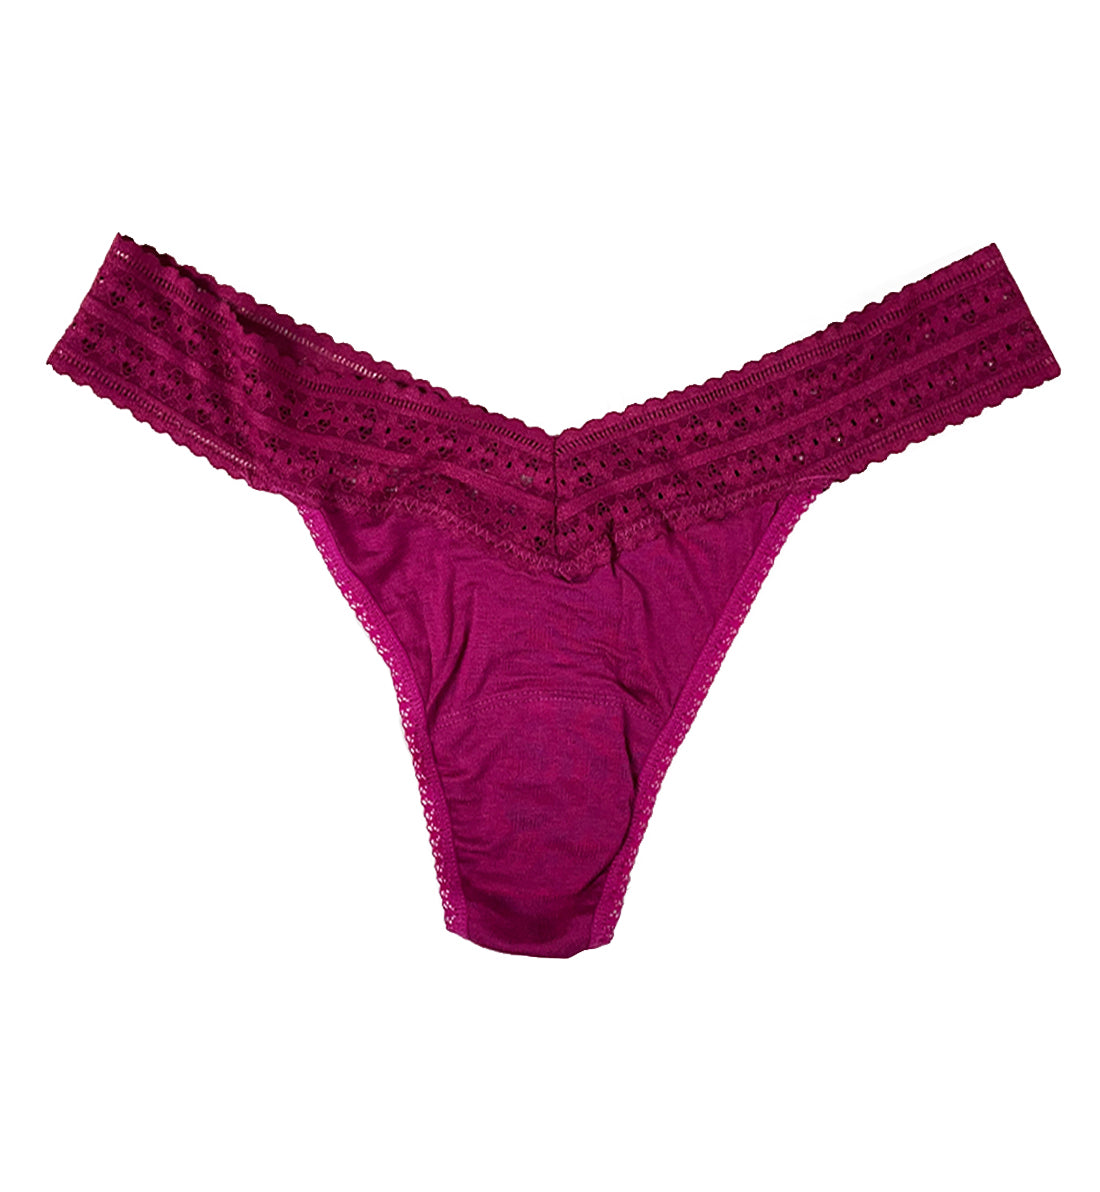 Hanky Panky DreamEase Original Rise Thong (631104),Pink Ruby - Pink Ruby,One Size